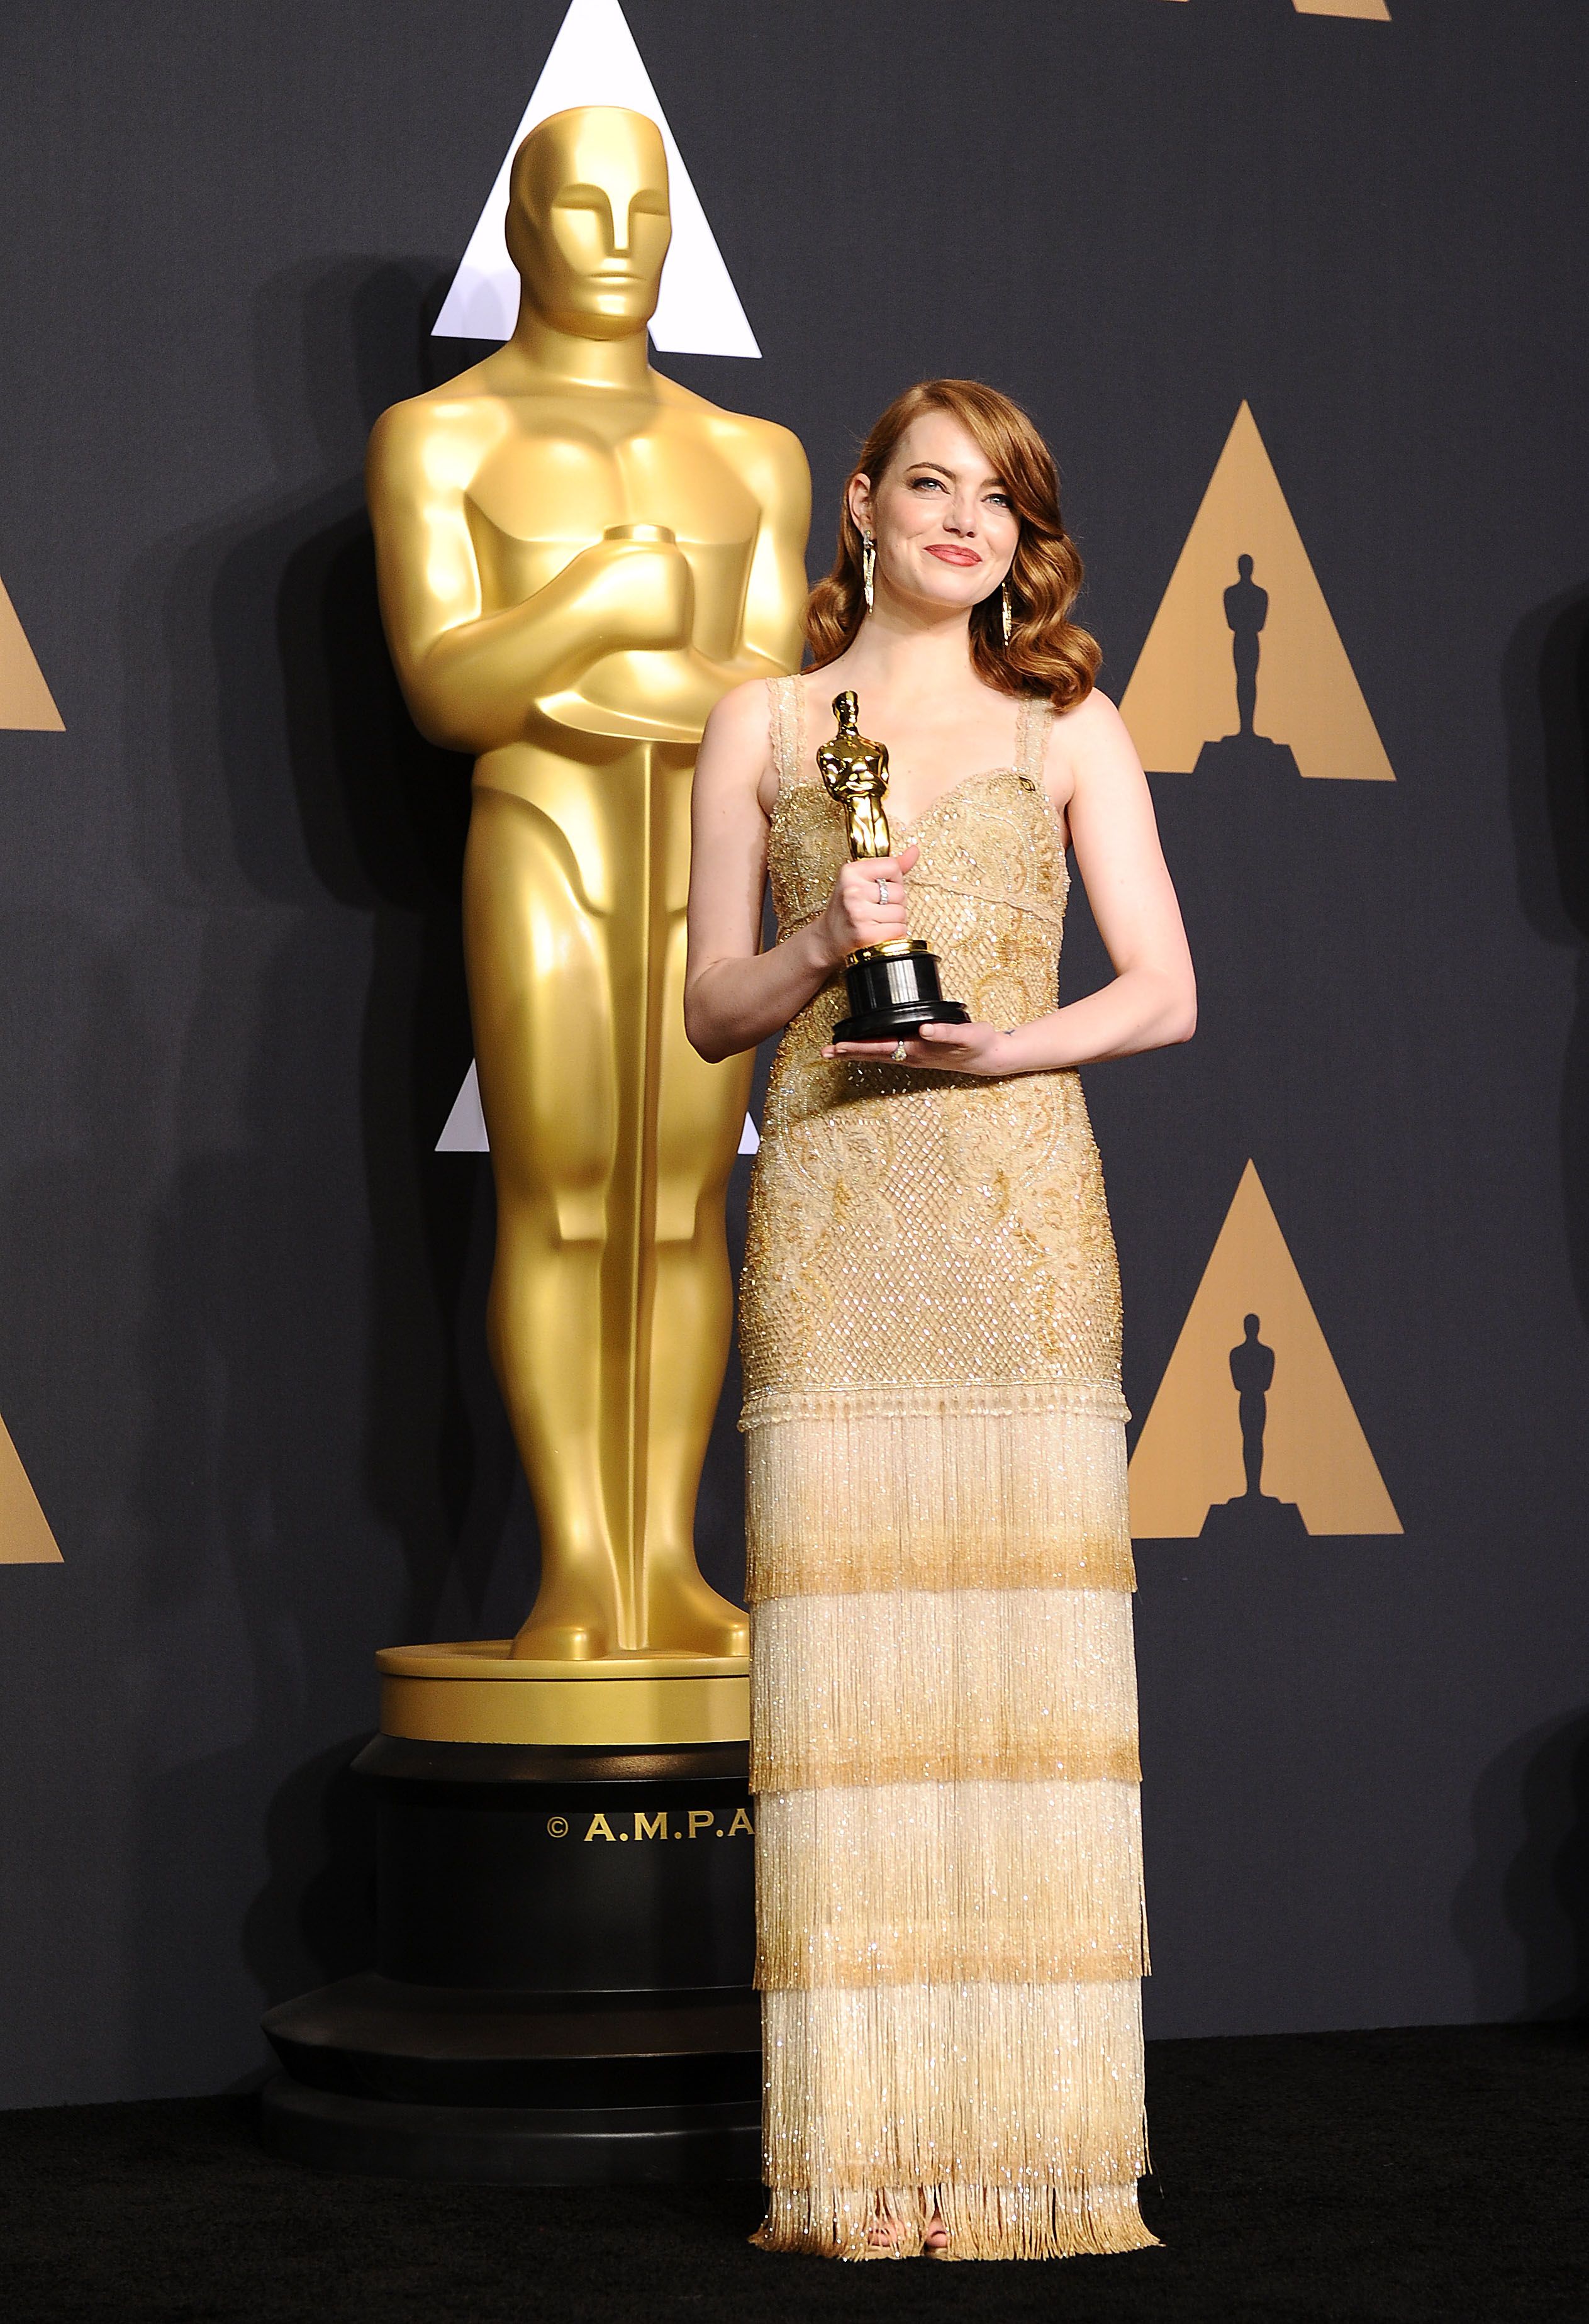 Emma Stone's 2019 Oscar Dress Looks Like a Honey Comb - 'The Favourite'  Actress' Red Carpet Outfit